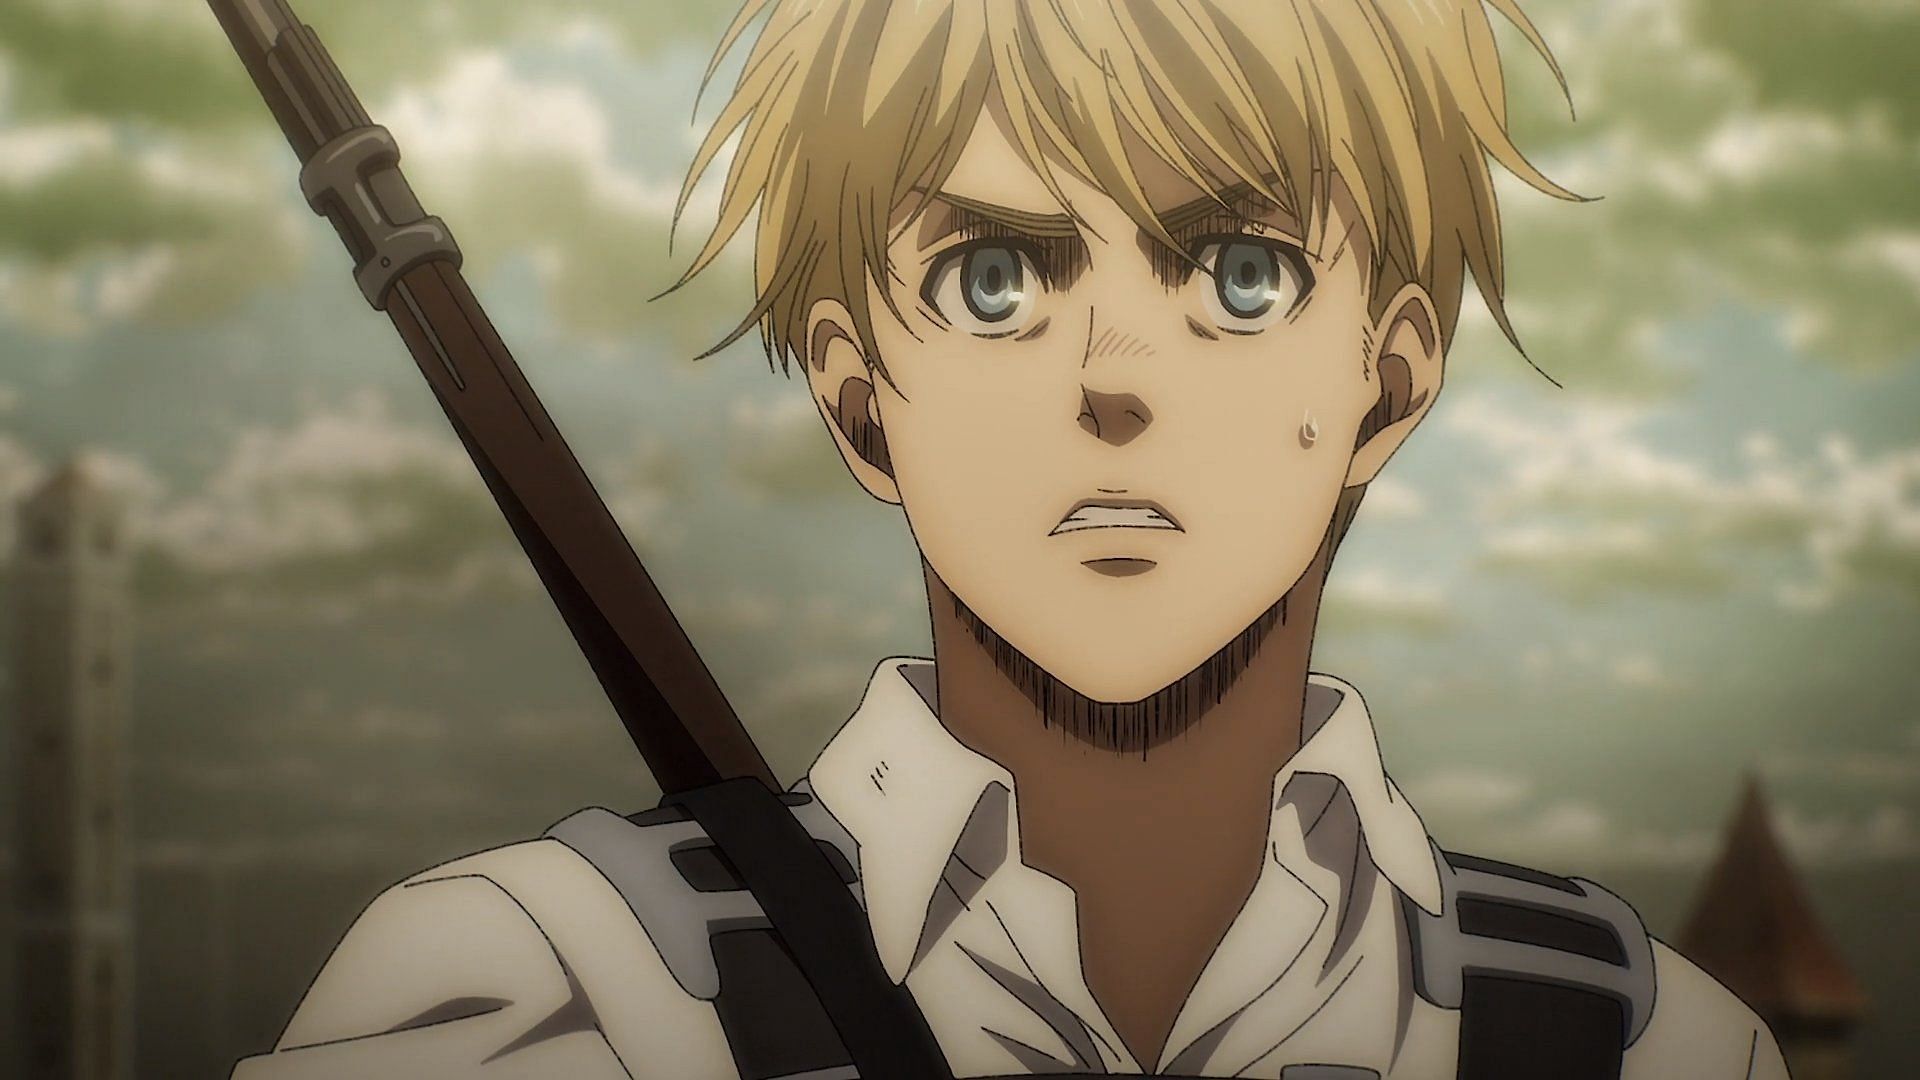 Attack on Titan's most recent episode showcases Armin's greatest weapon temporarily taken